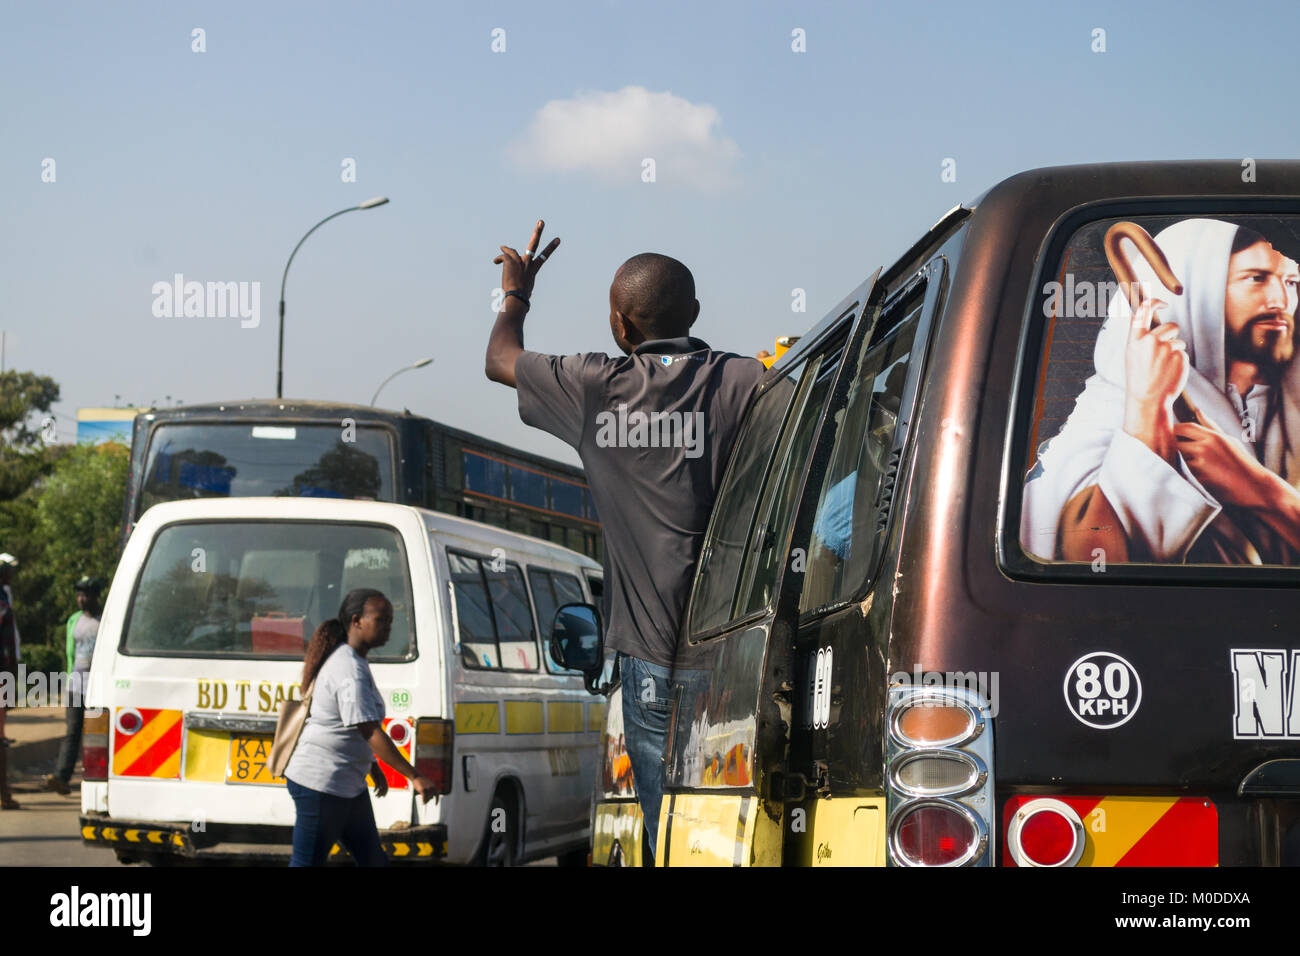 A bus driving on a road with the conductor standing in the doorway waiting for passengers, Nairobi, Kenya Stock Photo